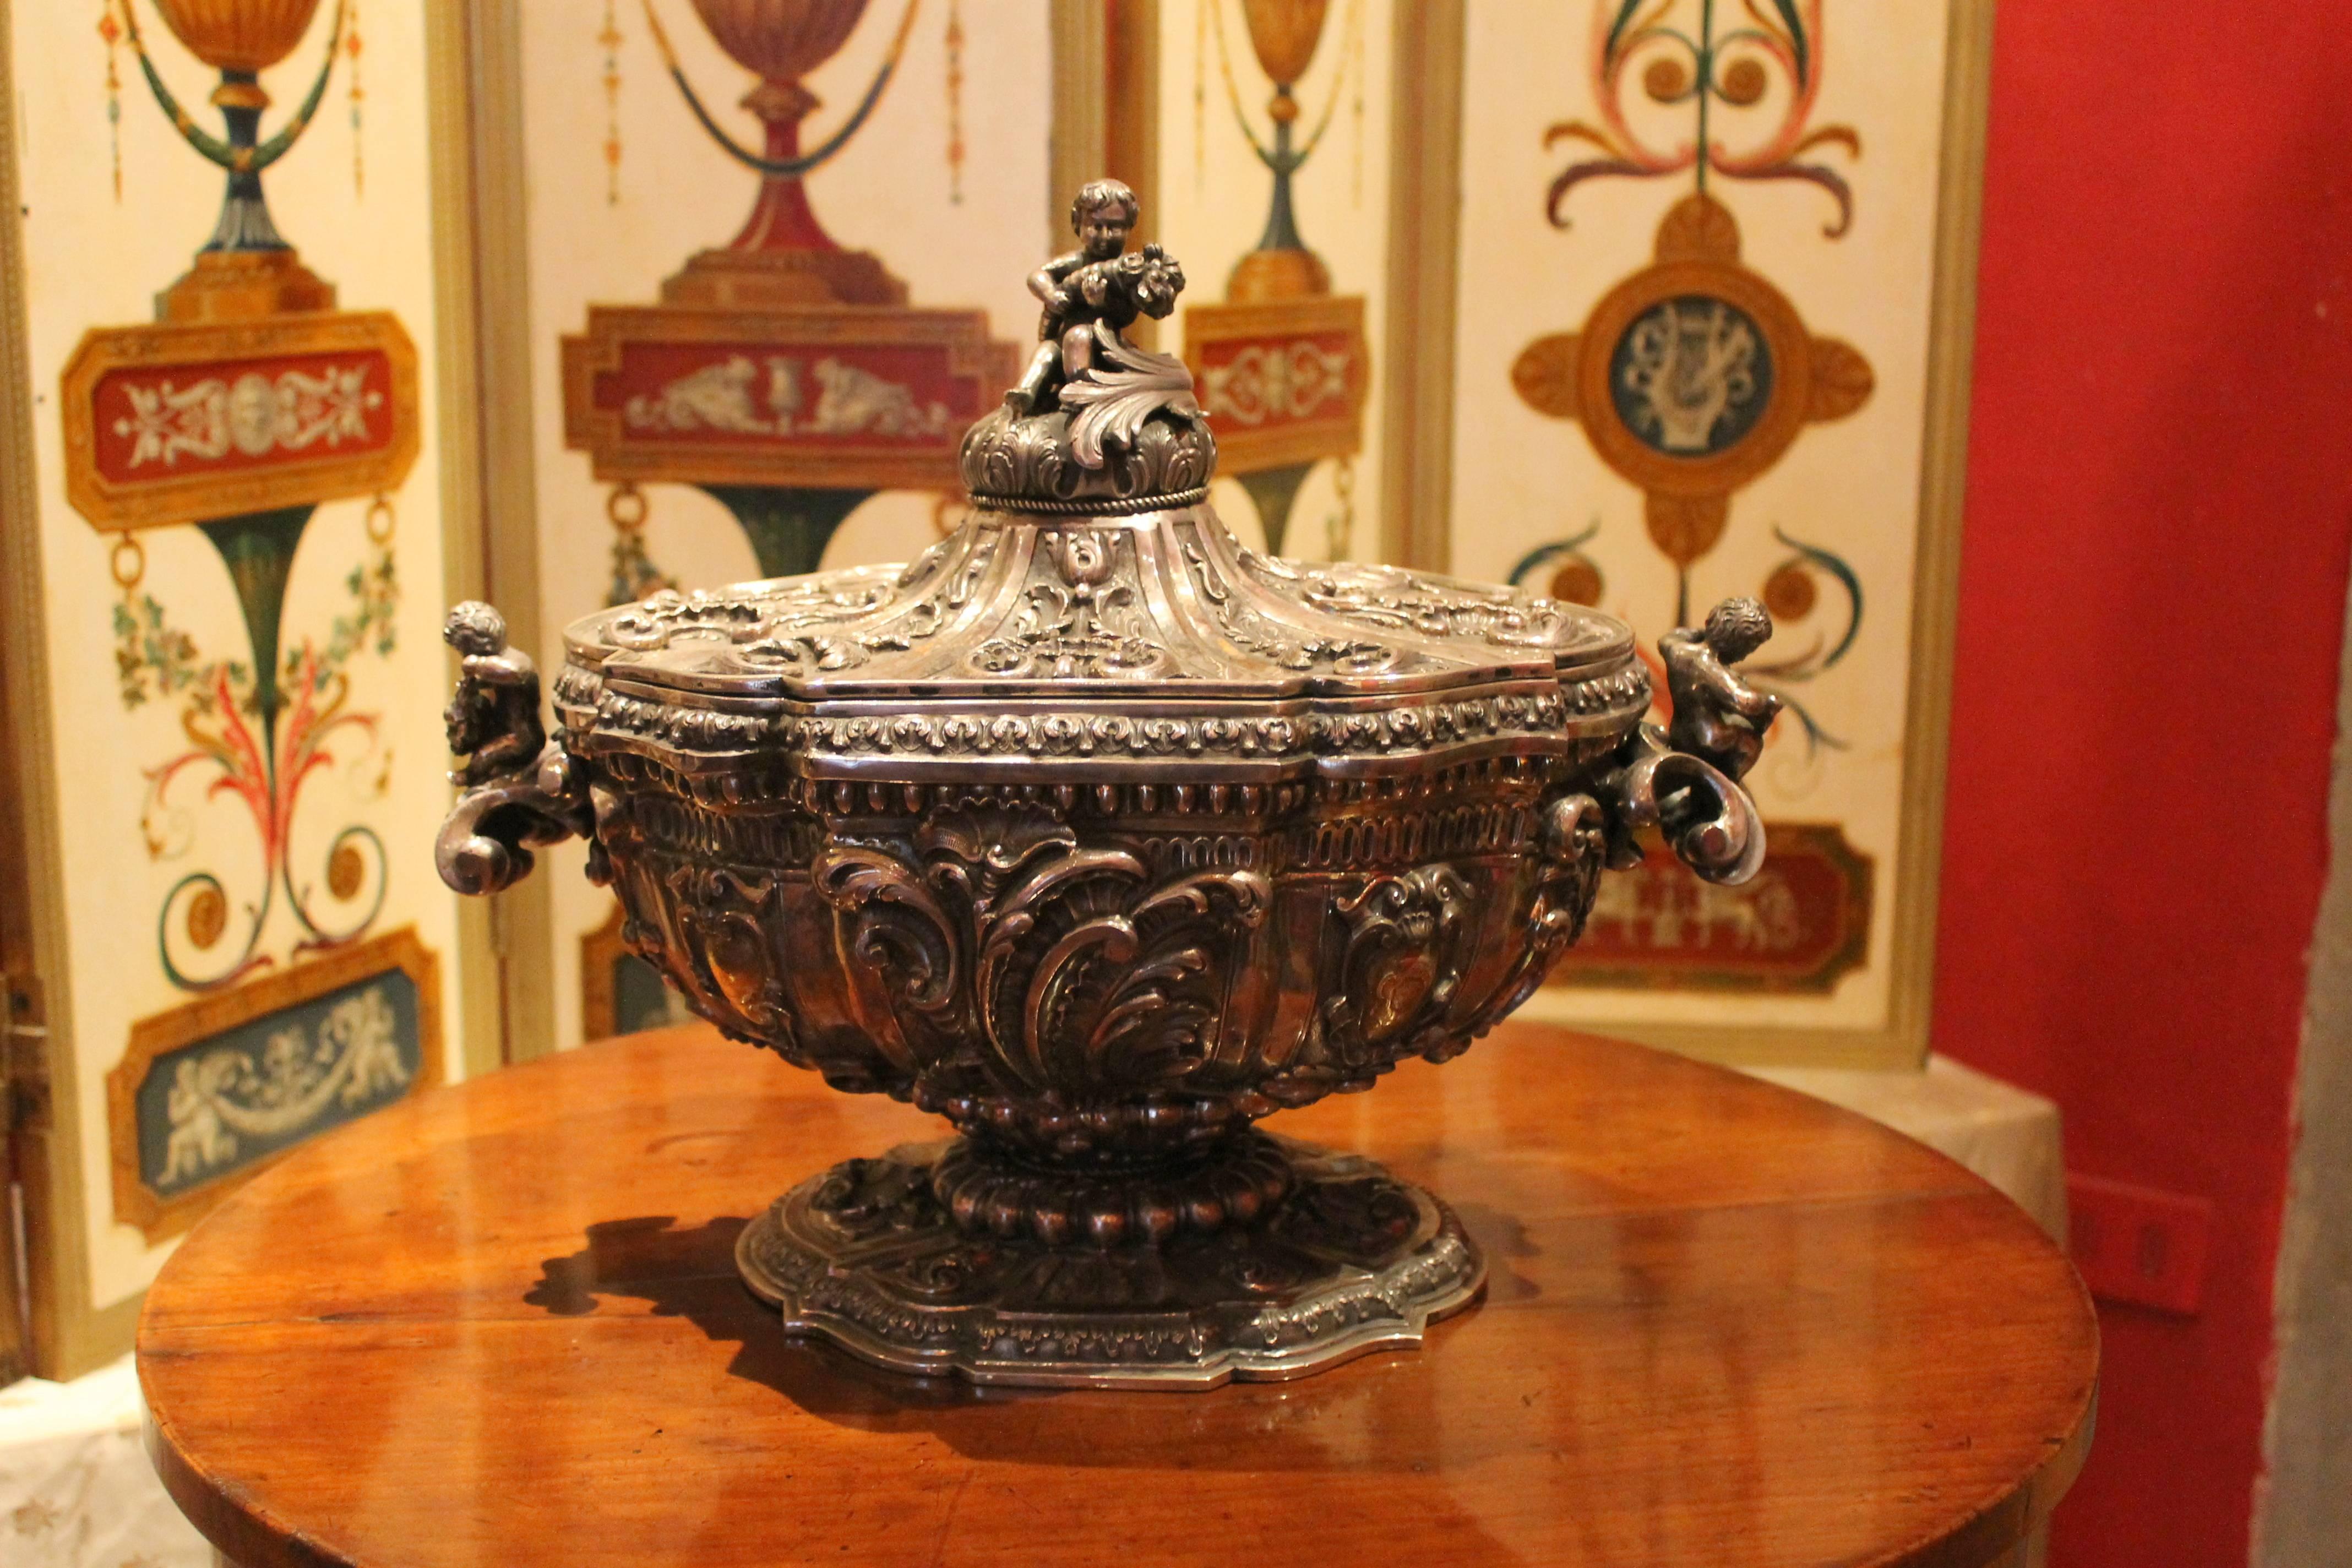 Hand-Carved 19th Century Italian Baroque Style Silver Centerpiece Bowl or Soup Tureen